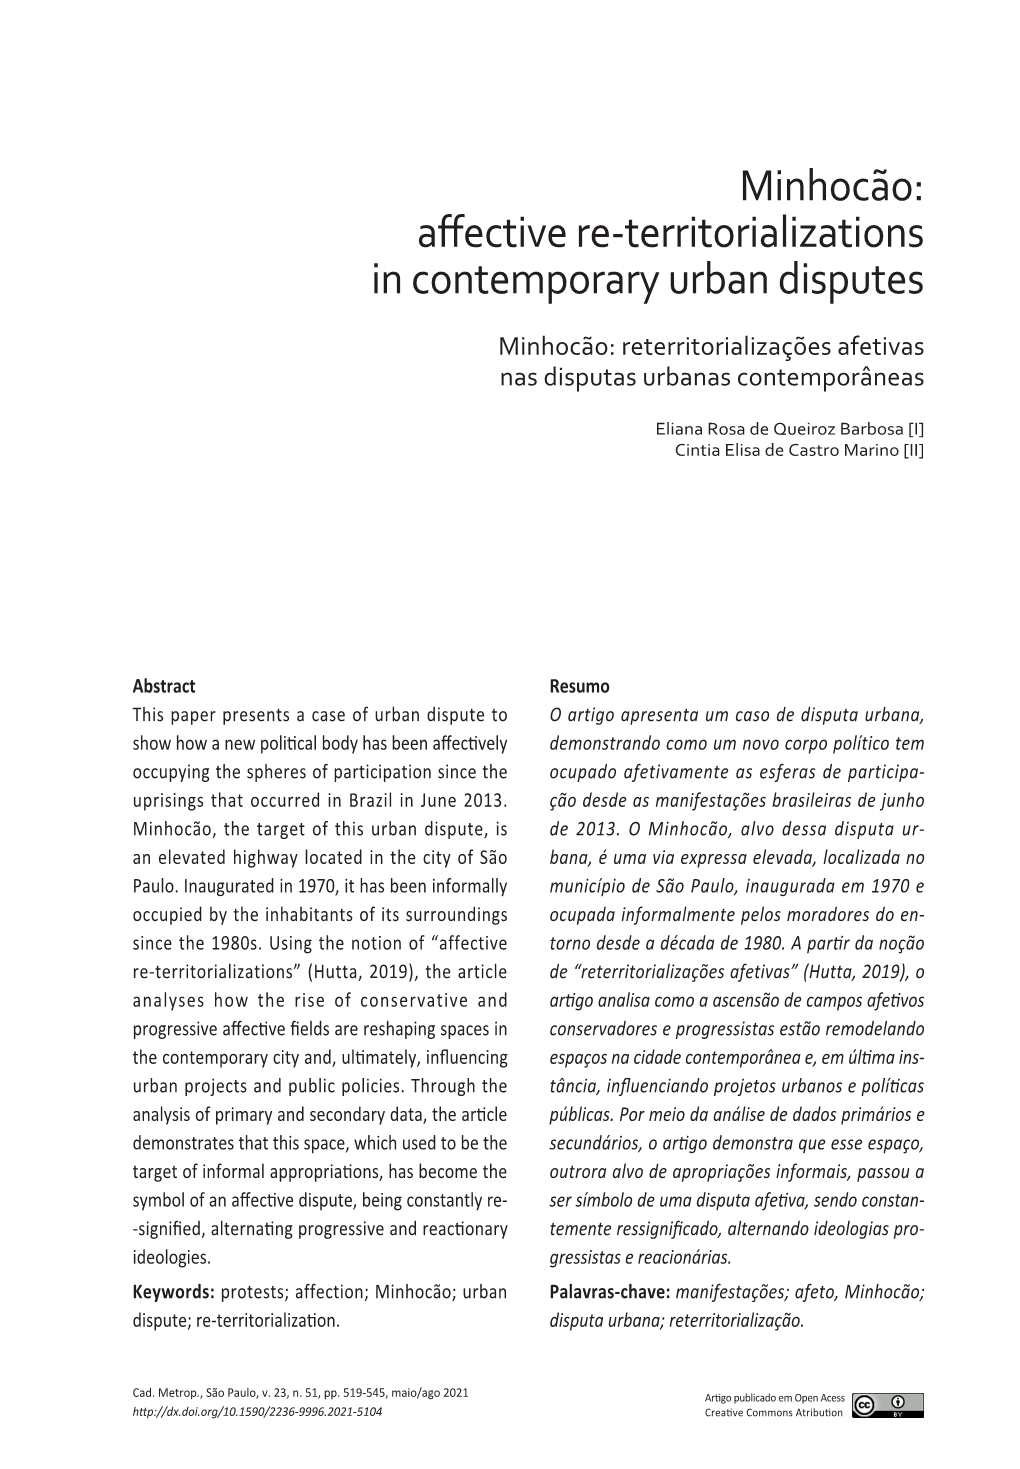 Affective Re-Territorializations in Contemporary Urban Disputes